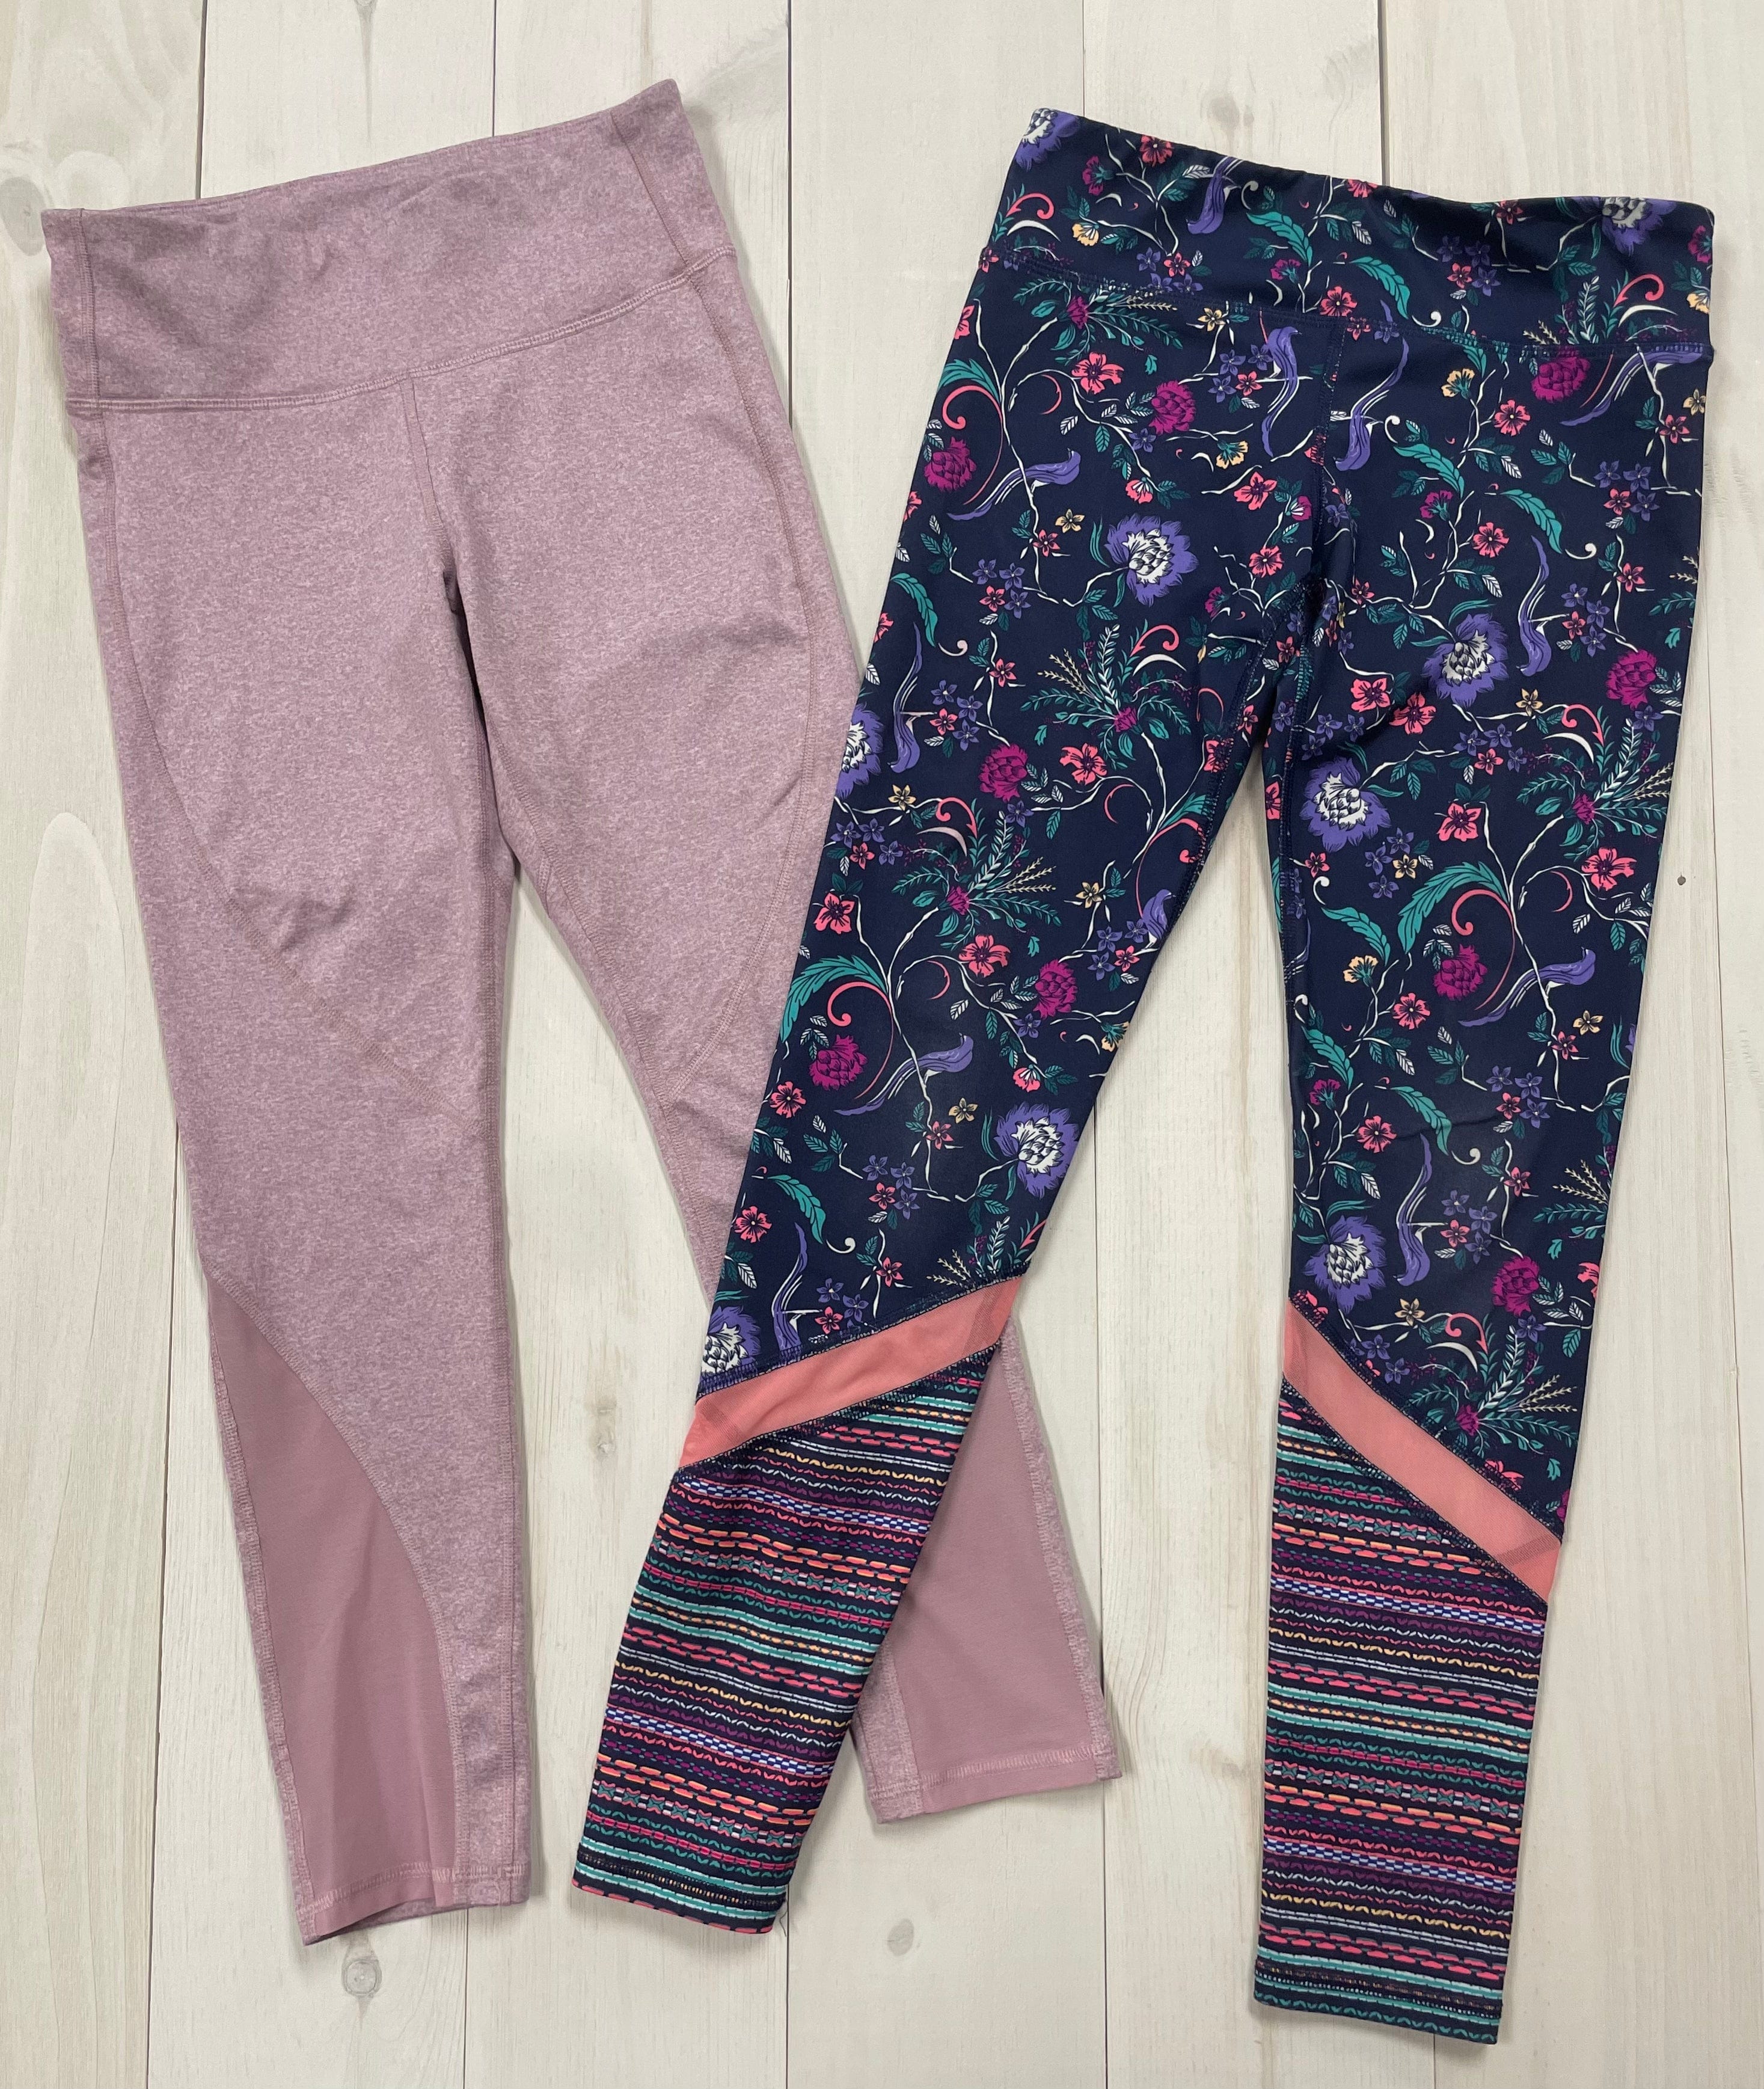 Minnows Childhood Goods Old Navy Leggings Two Piece Set, 10/12